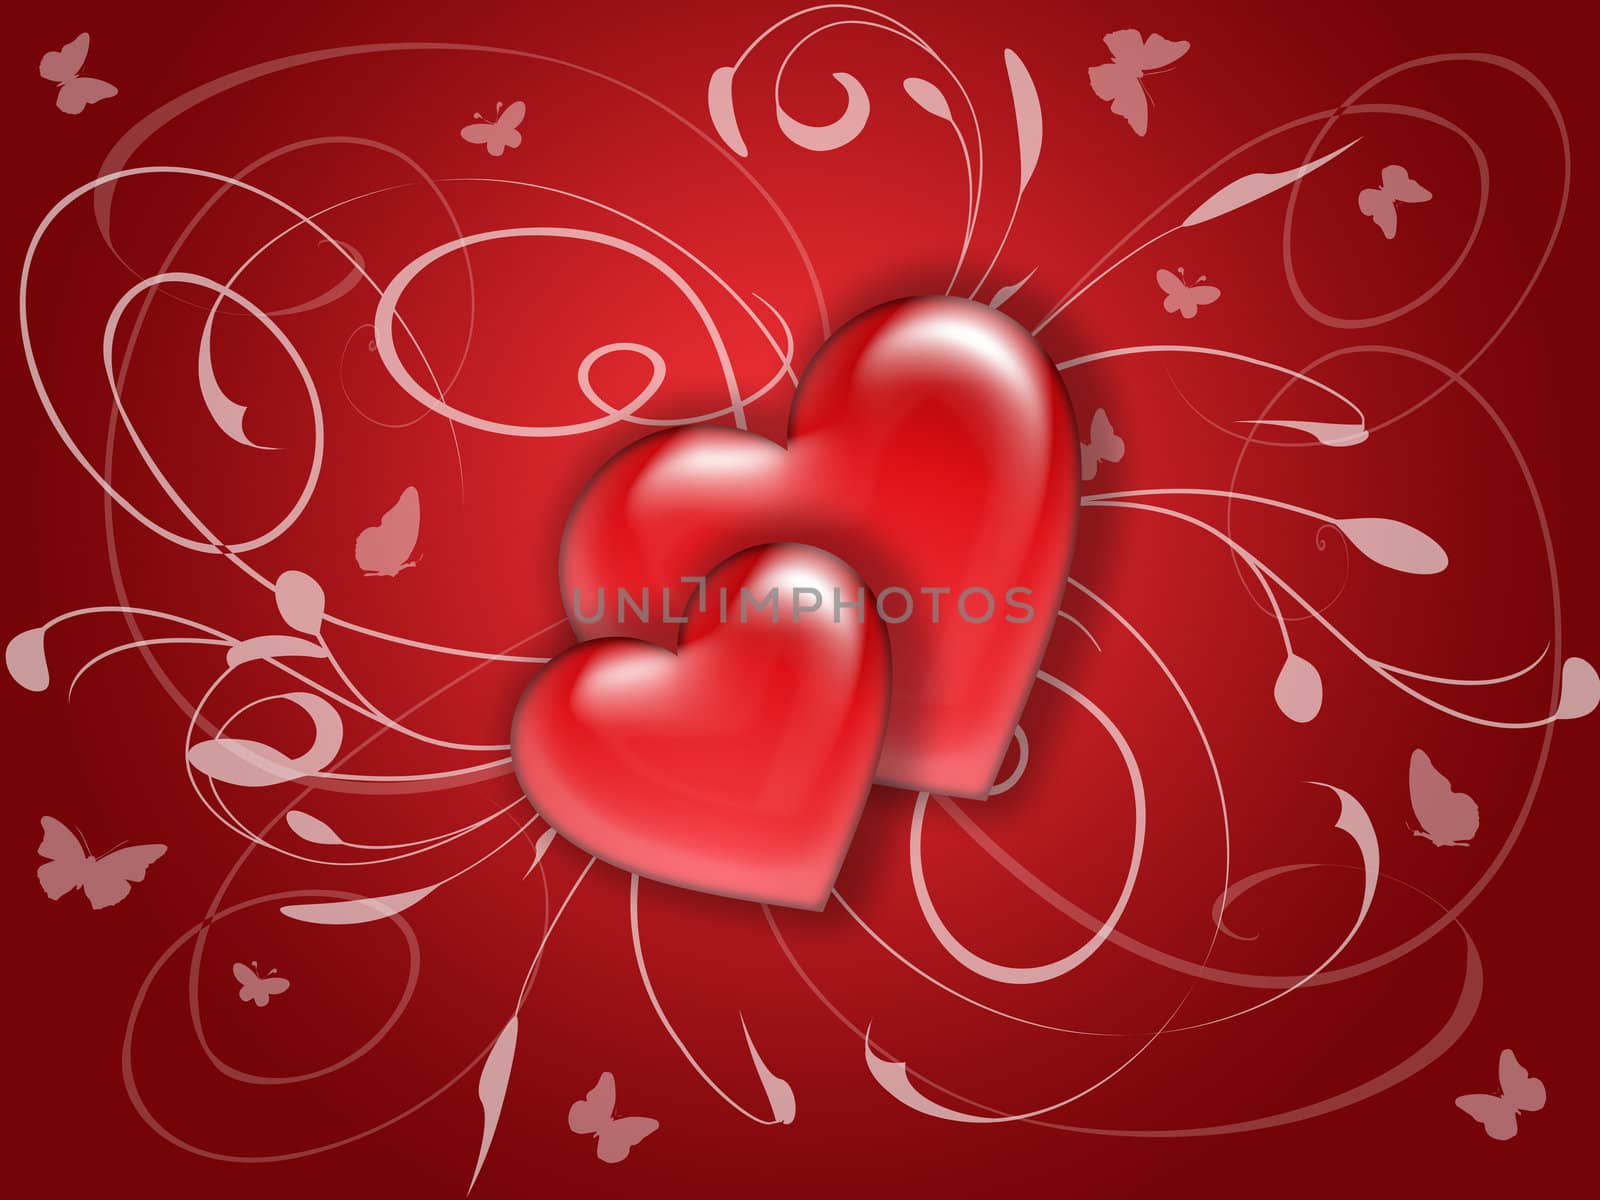 postcard or background with hearts and flowers ornaments
